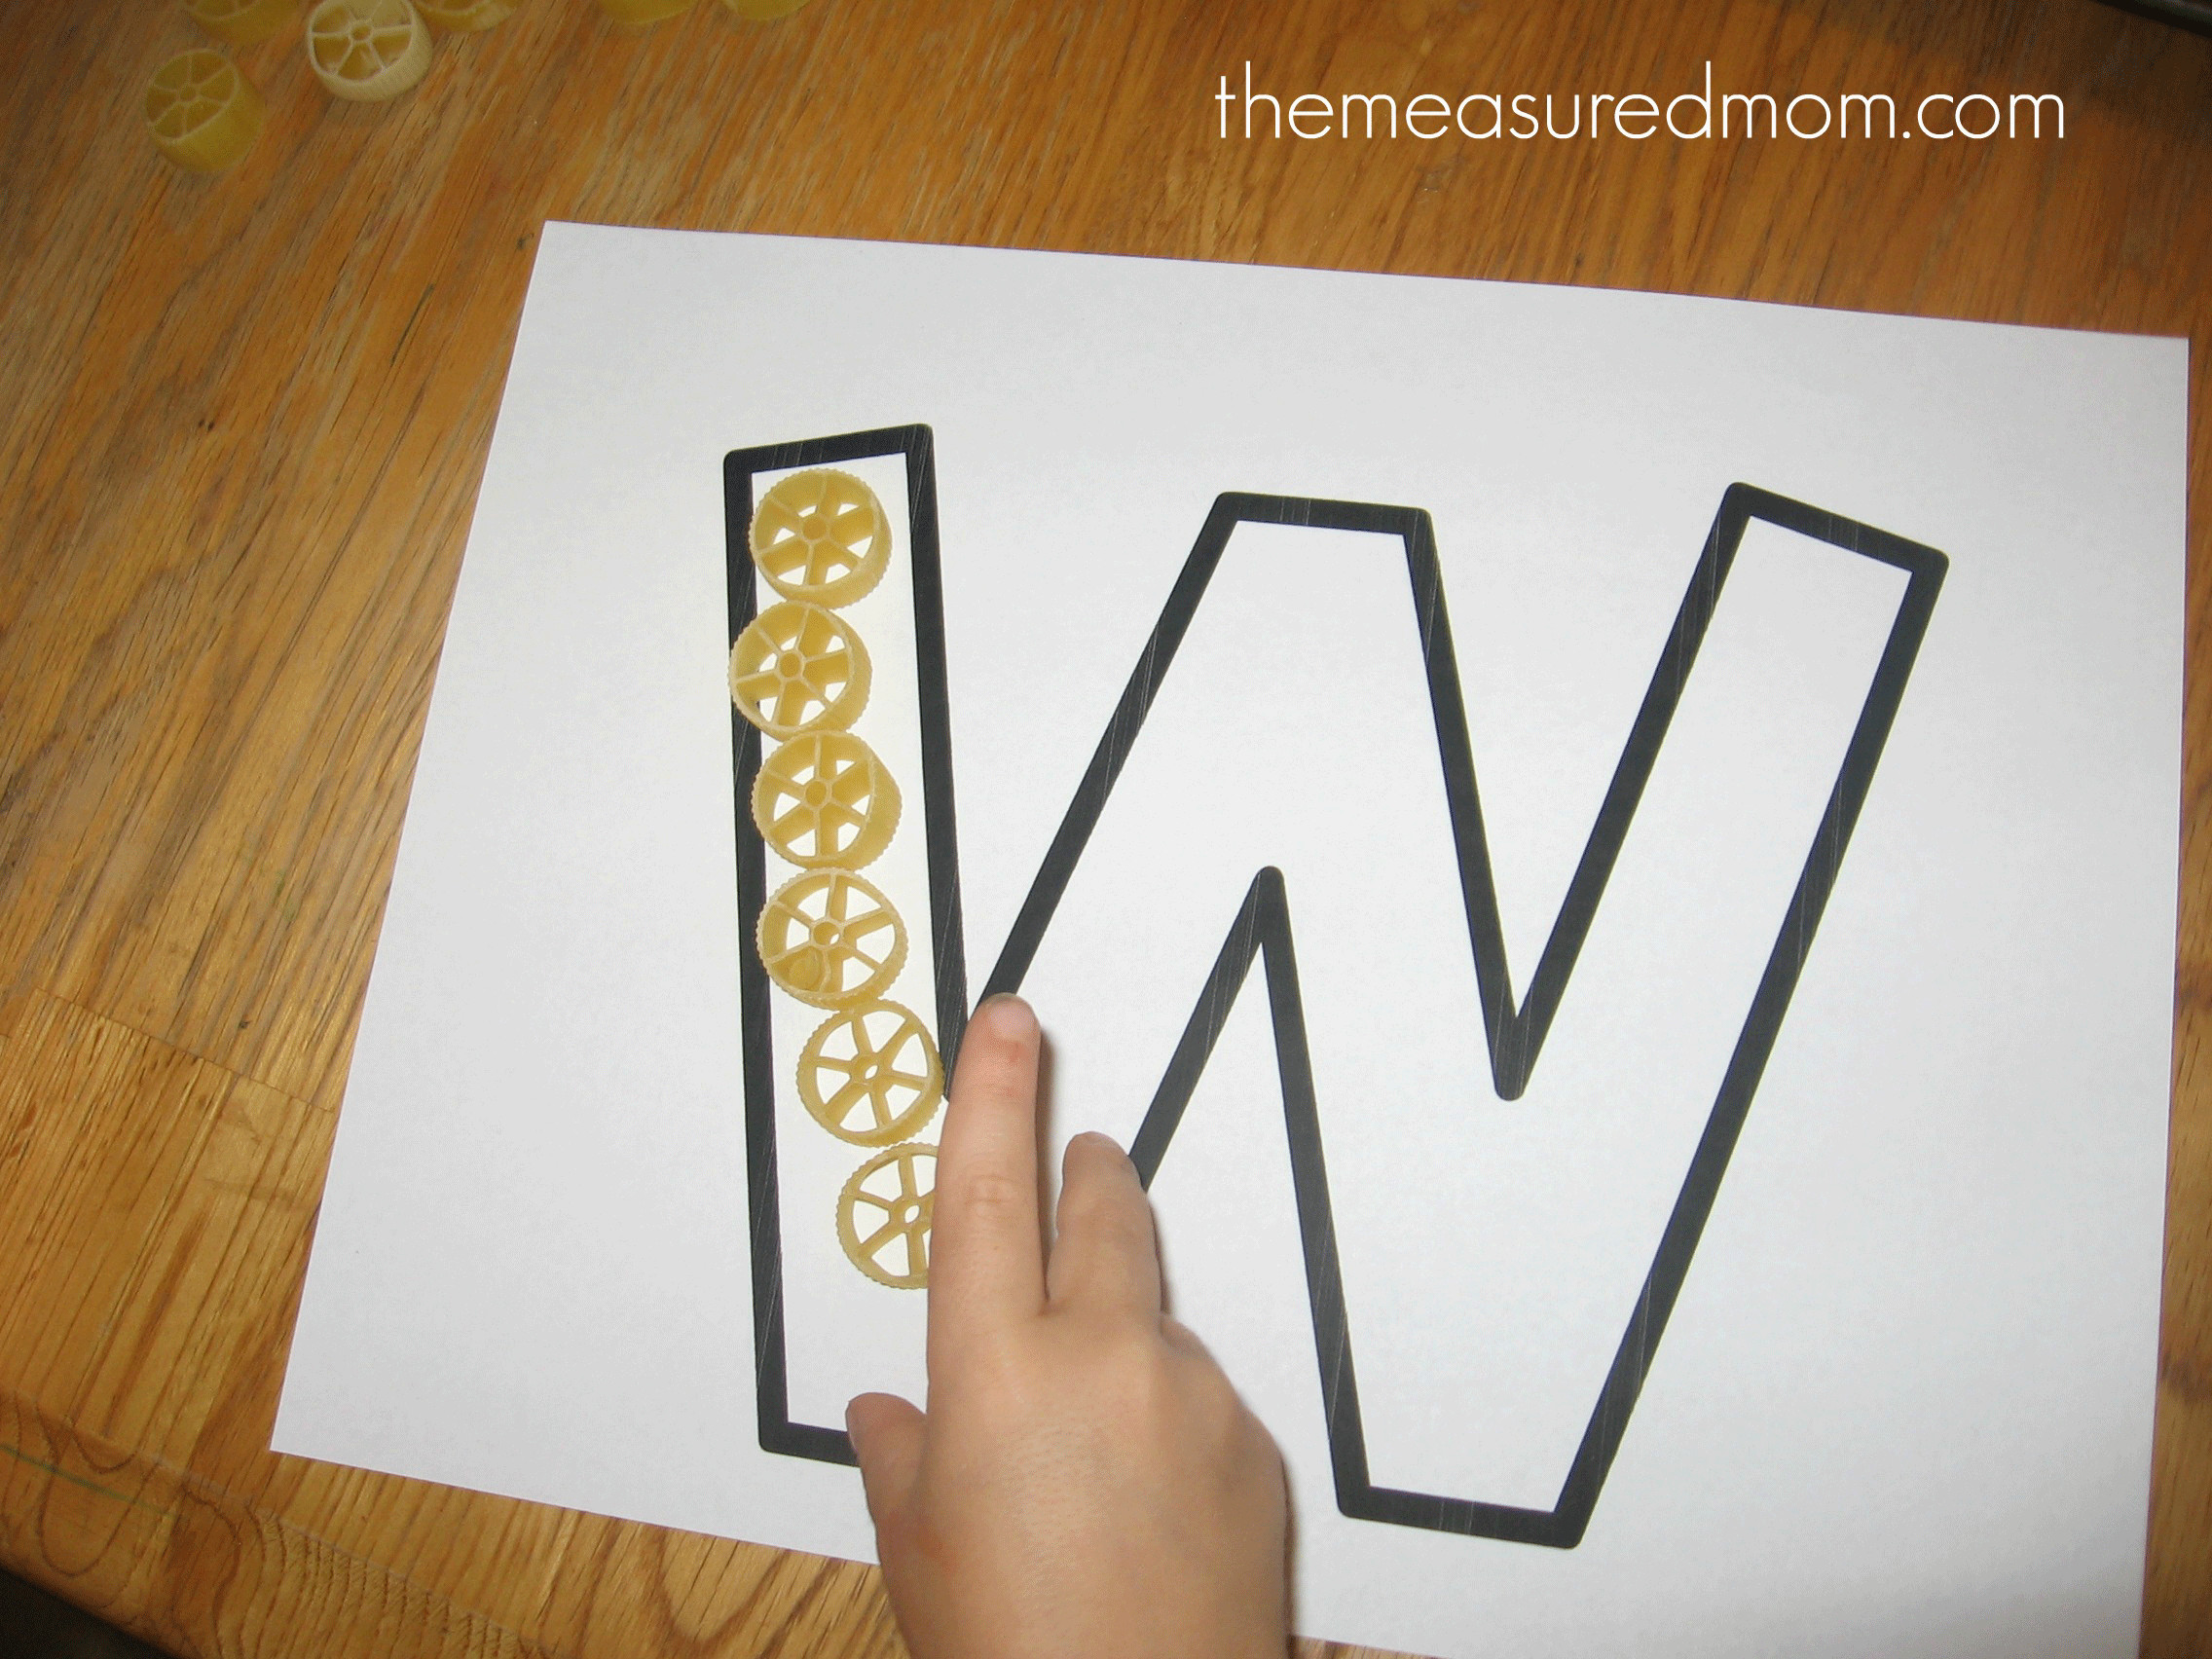 W Crafts For Preschoolers
 Writing the Alphabet for Preschoolers the letter W The